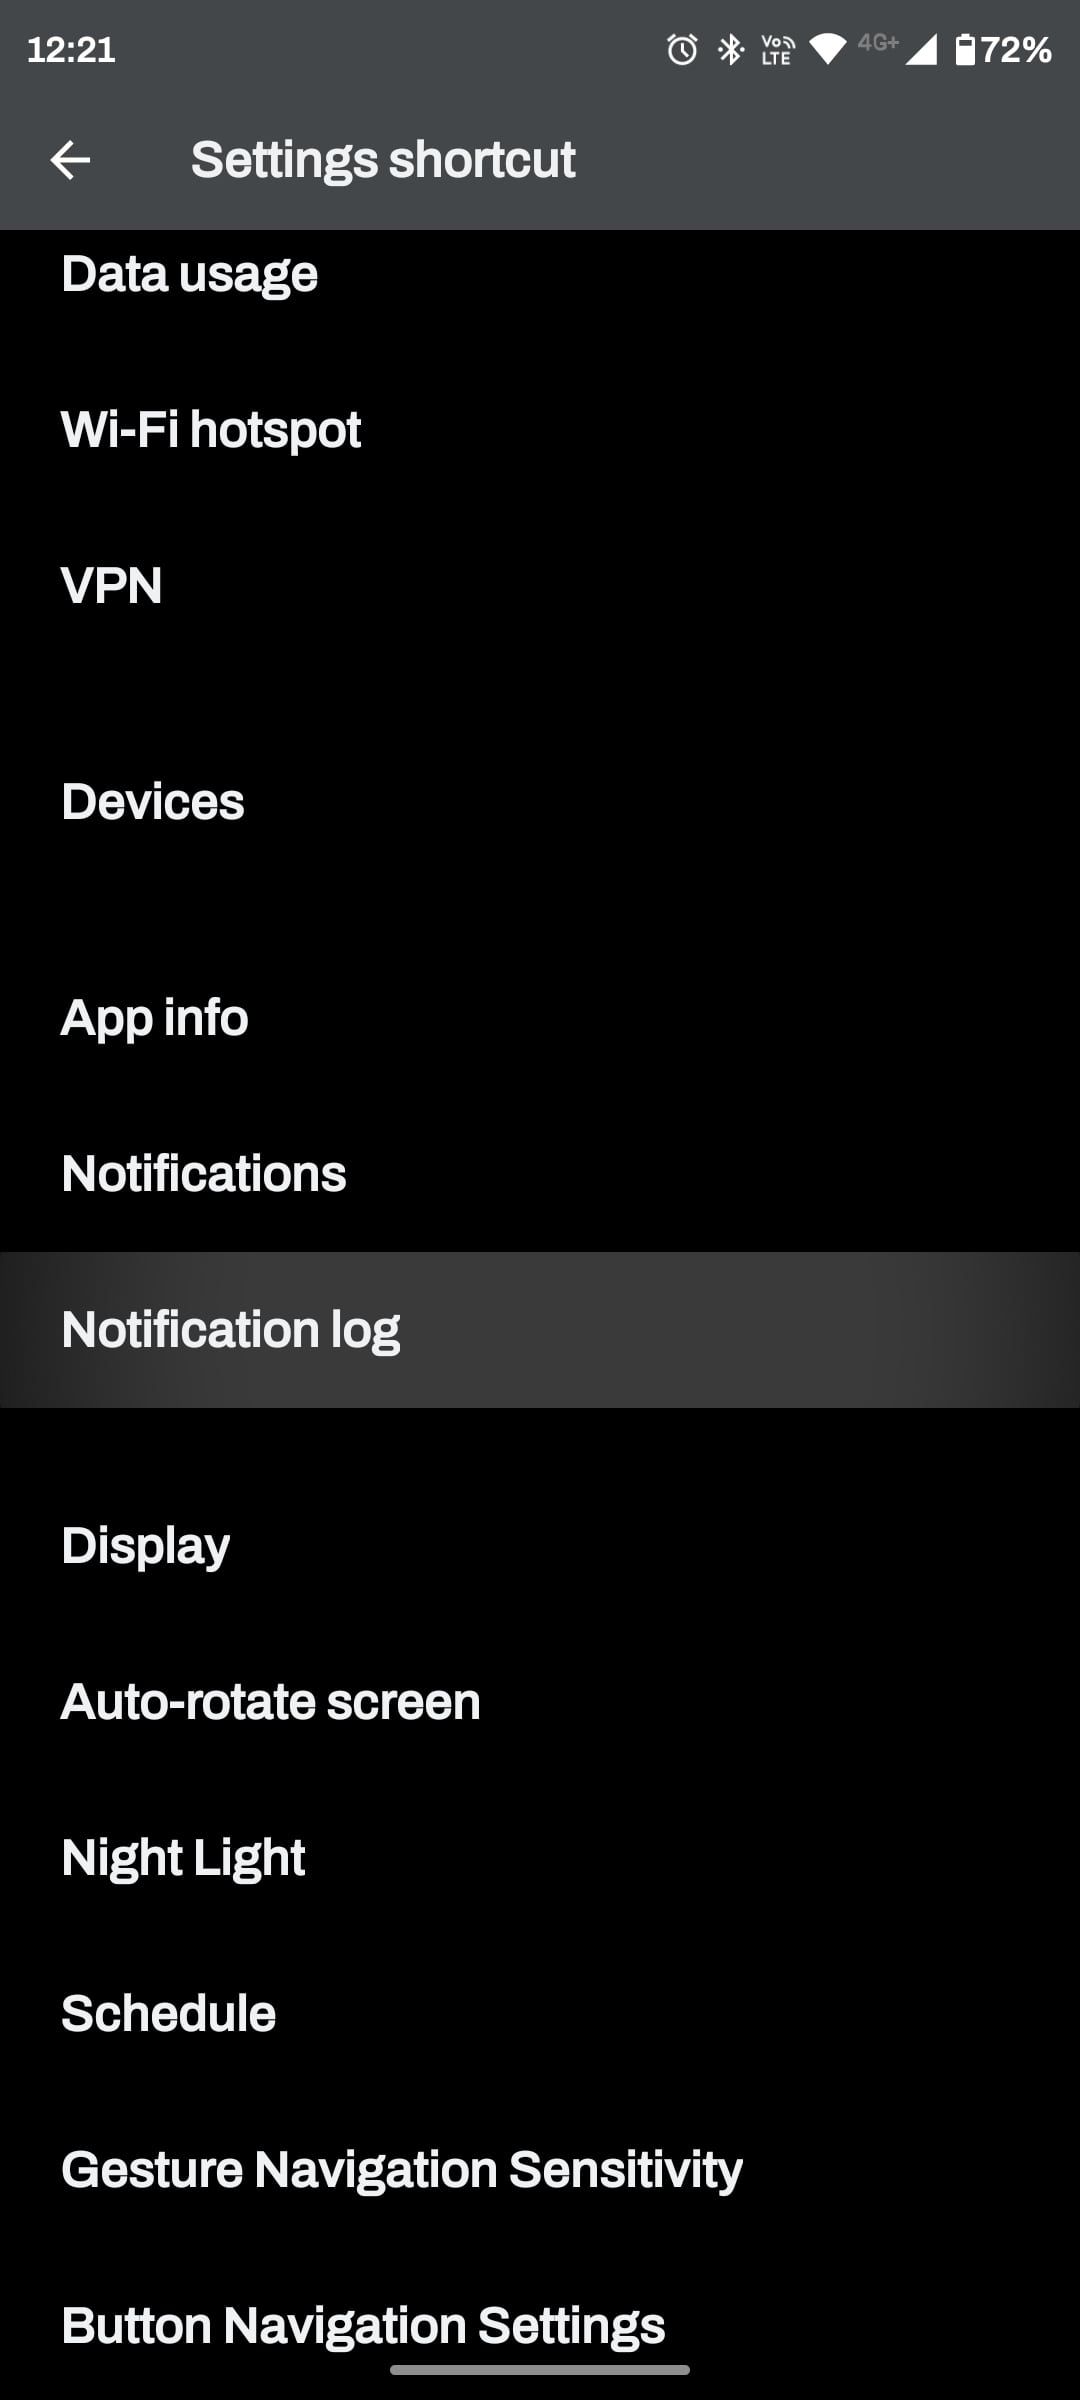 Notification log highlighted in settings shortcut list for settings shortcut widget